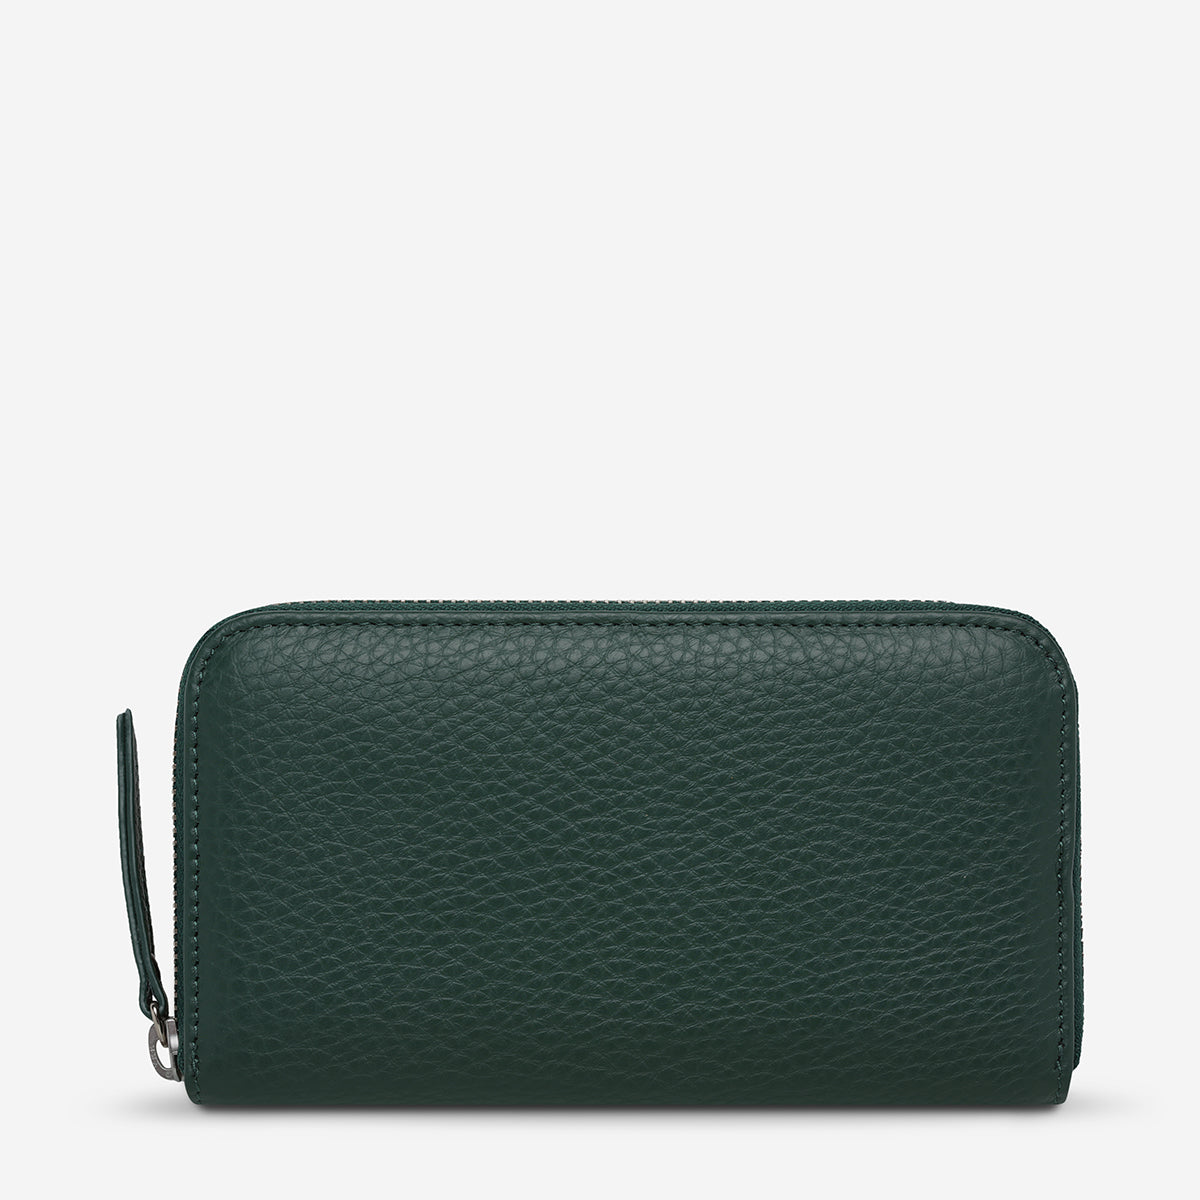 Yet To Come Wallet - Teal